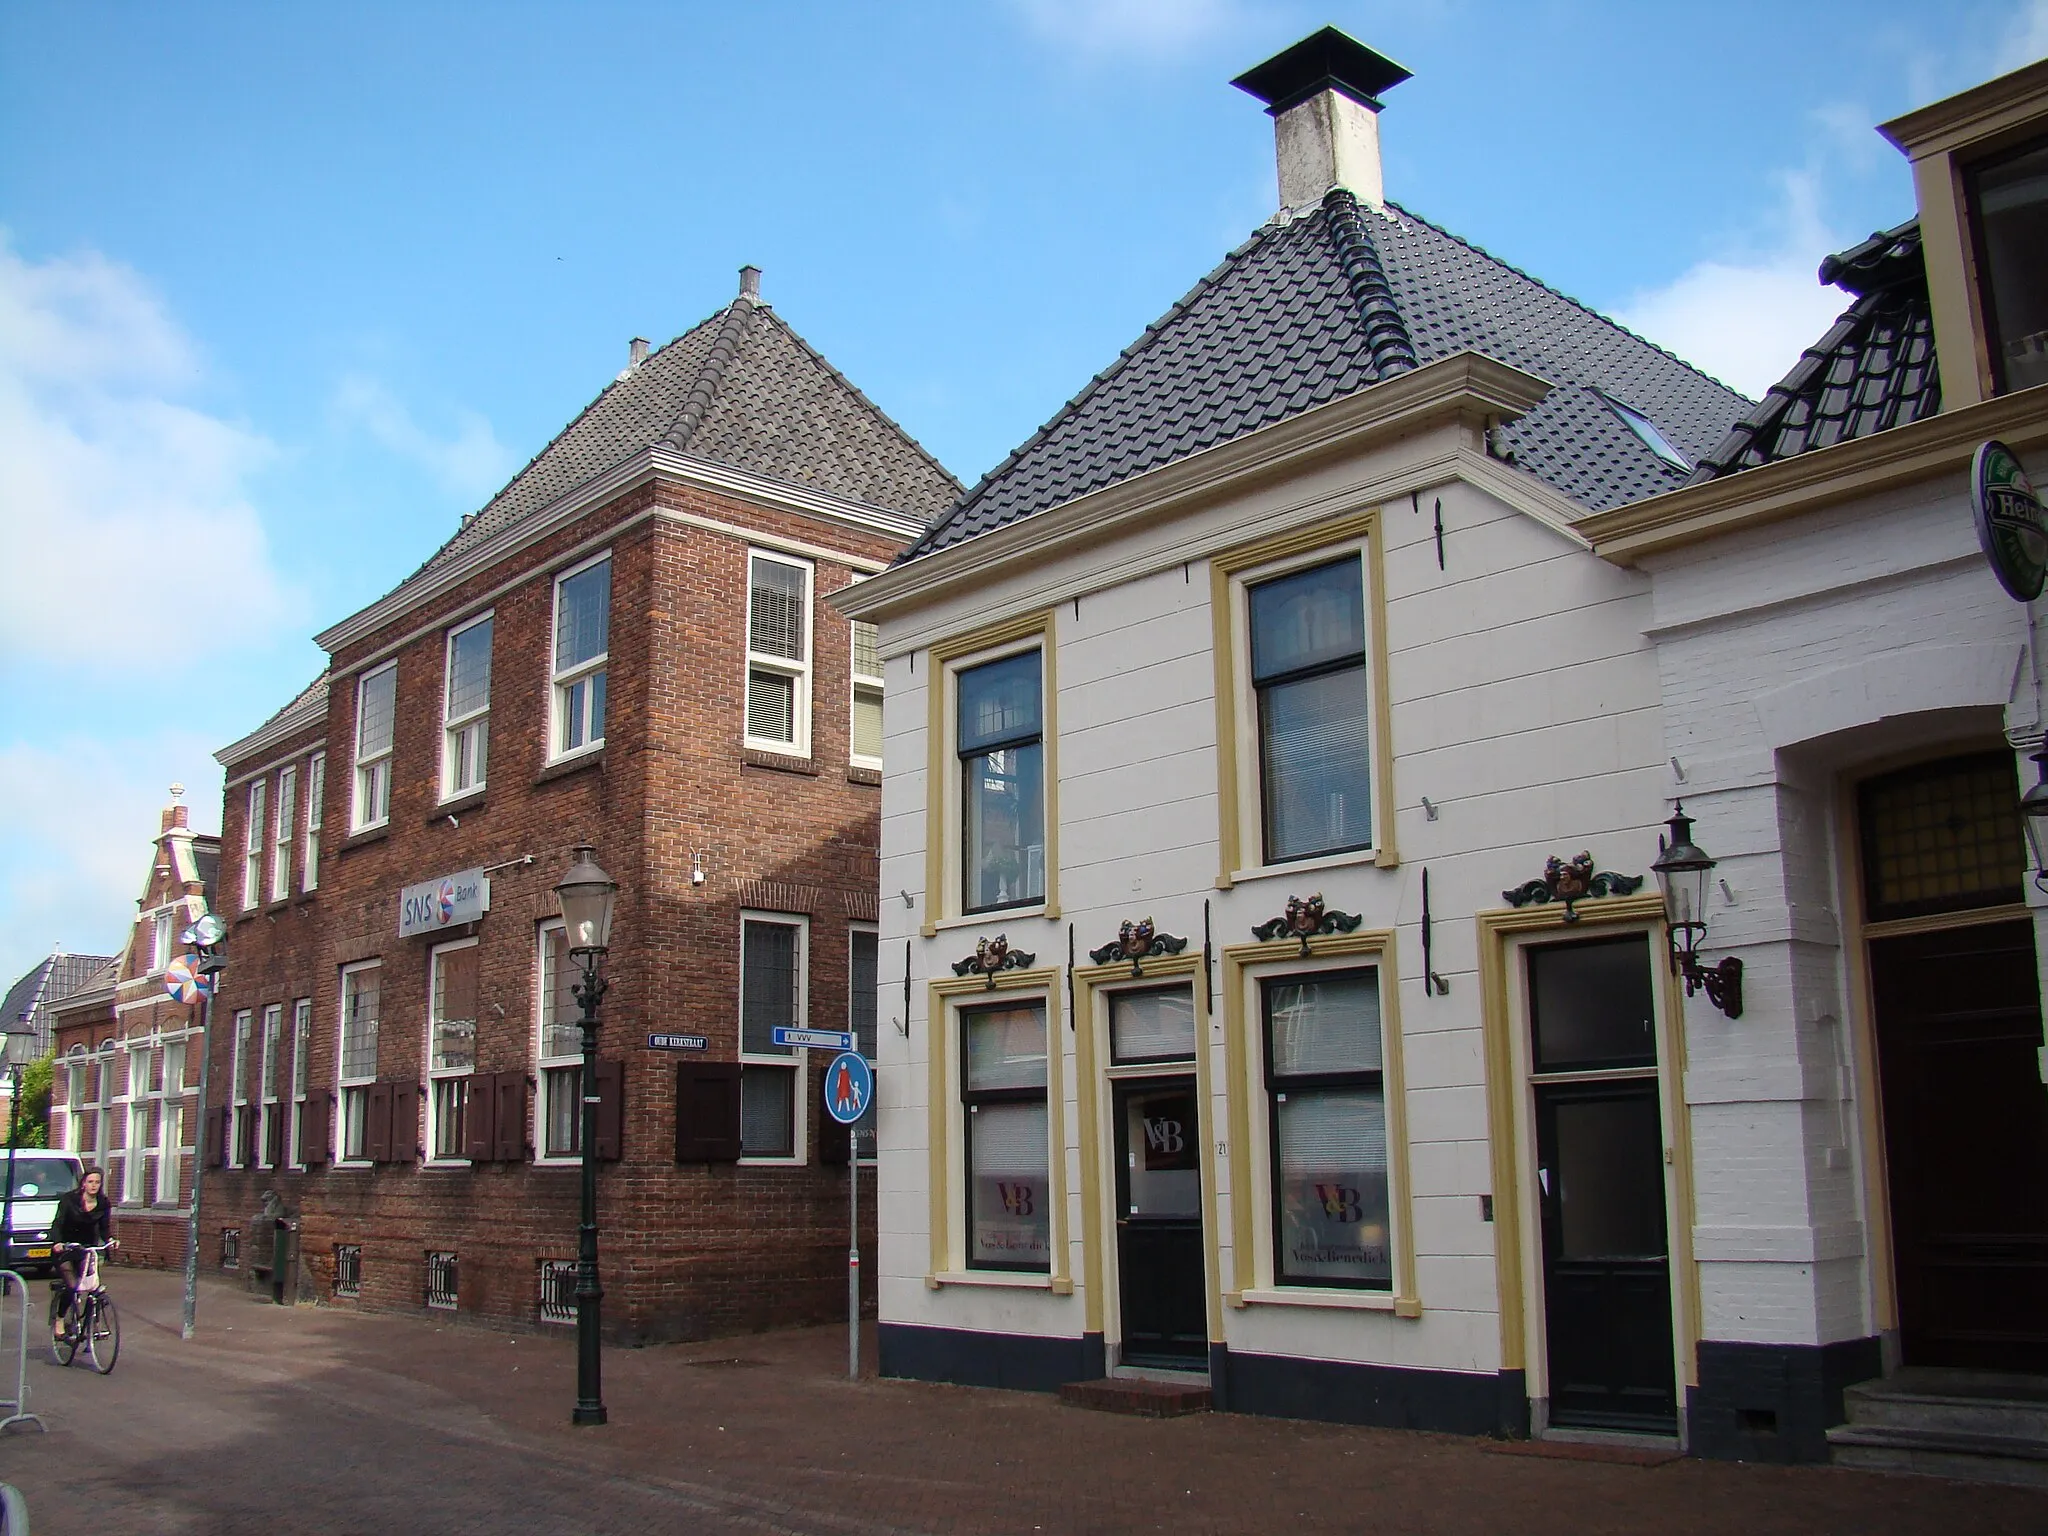 Photo showing: Impressions of Appingedam, Netherlands

Appingedam